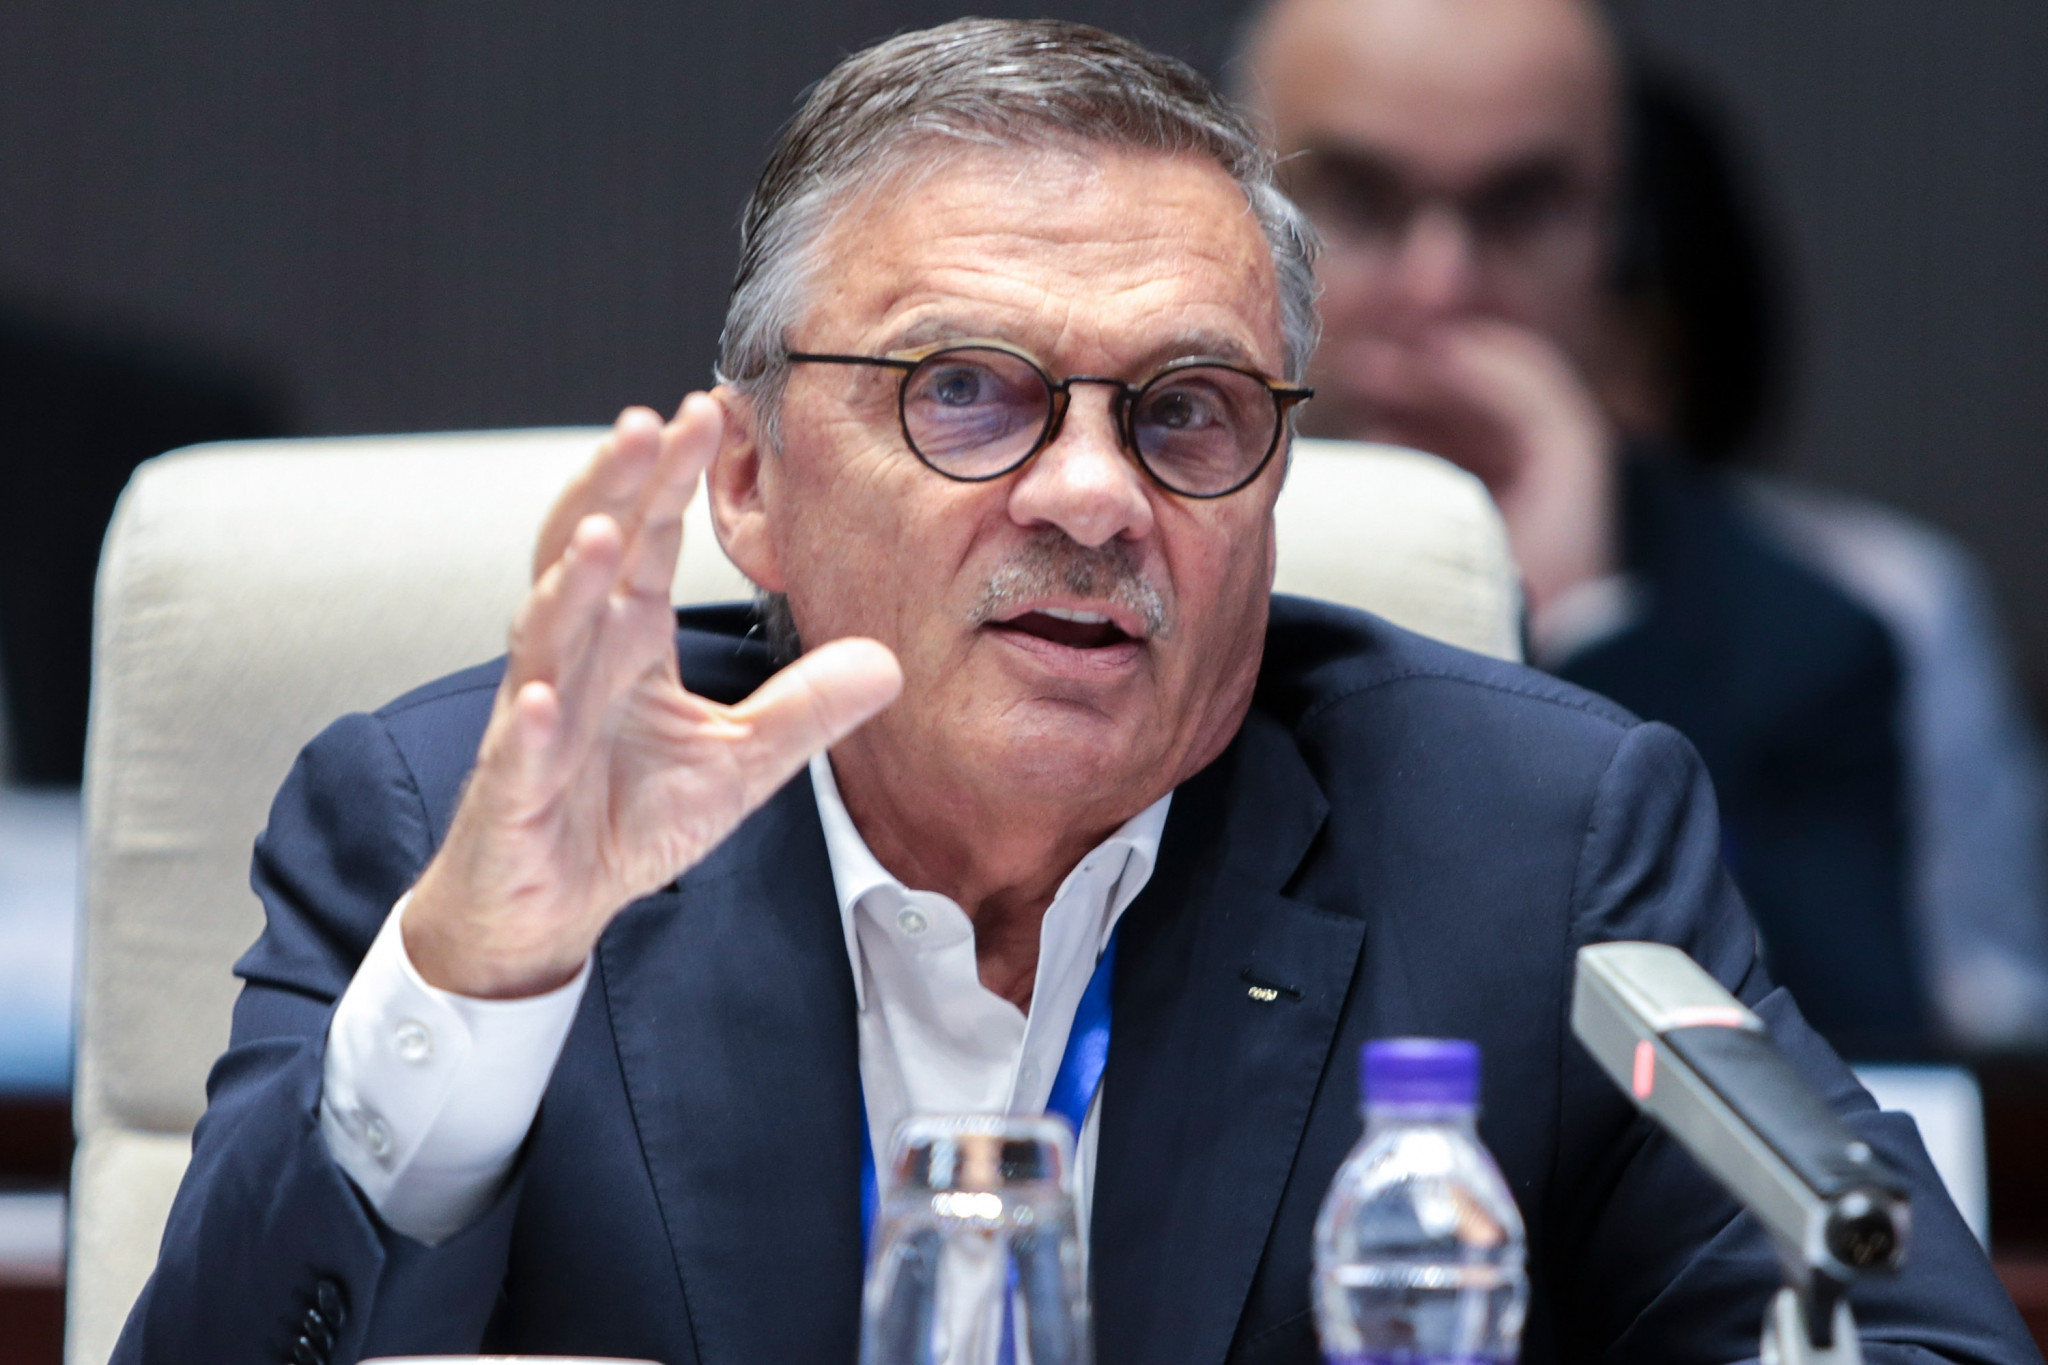 IIHF President Fasel hints at working in Russia after stepping down next year